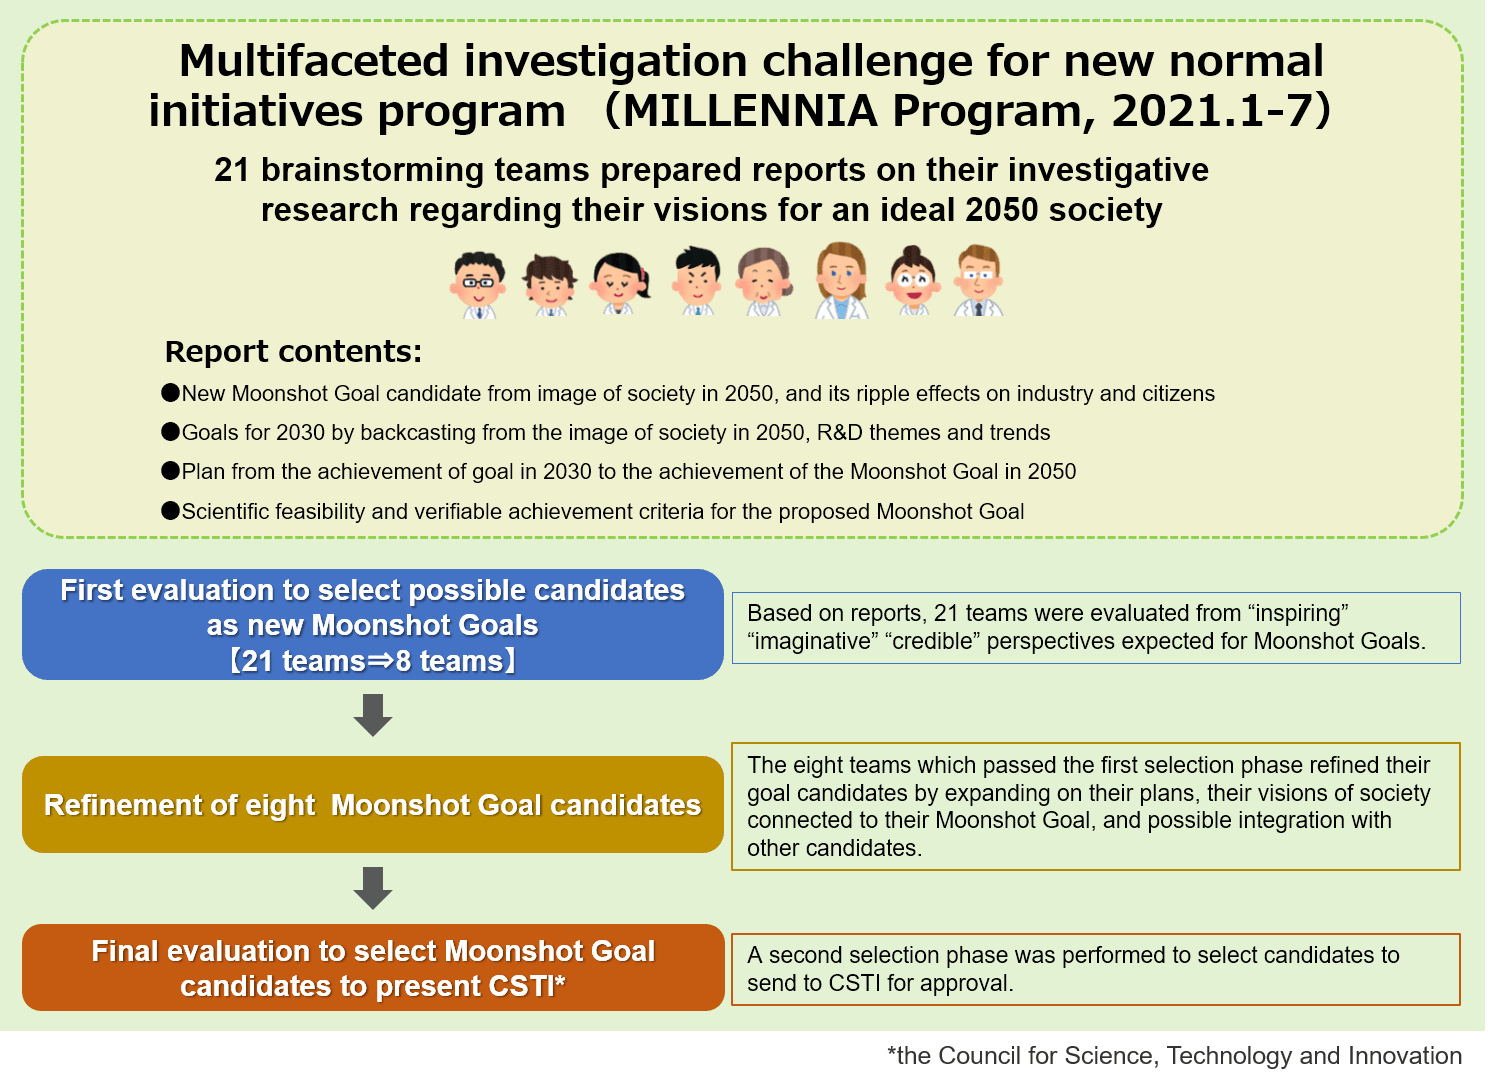 Multifaceted investigation challenge for new normal initiatives program